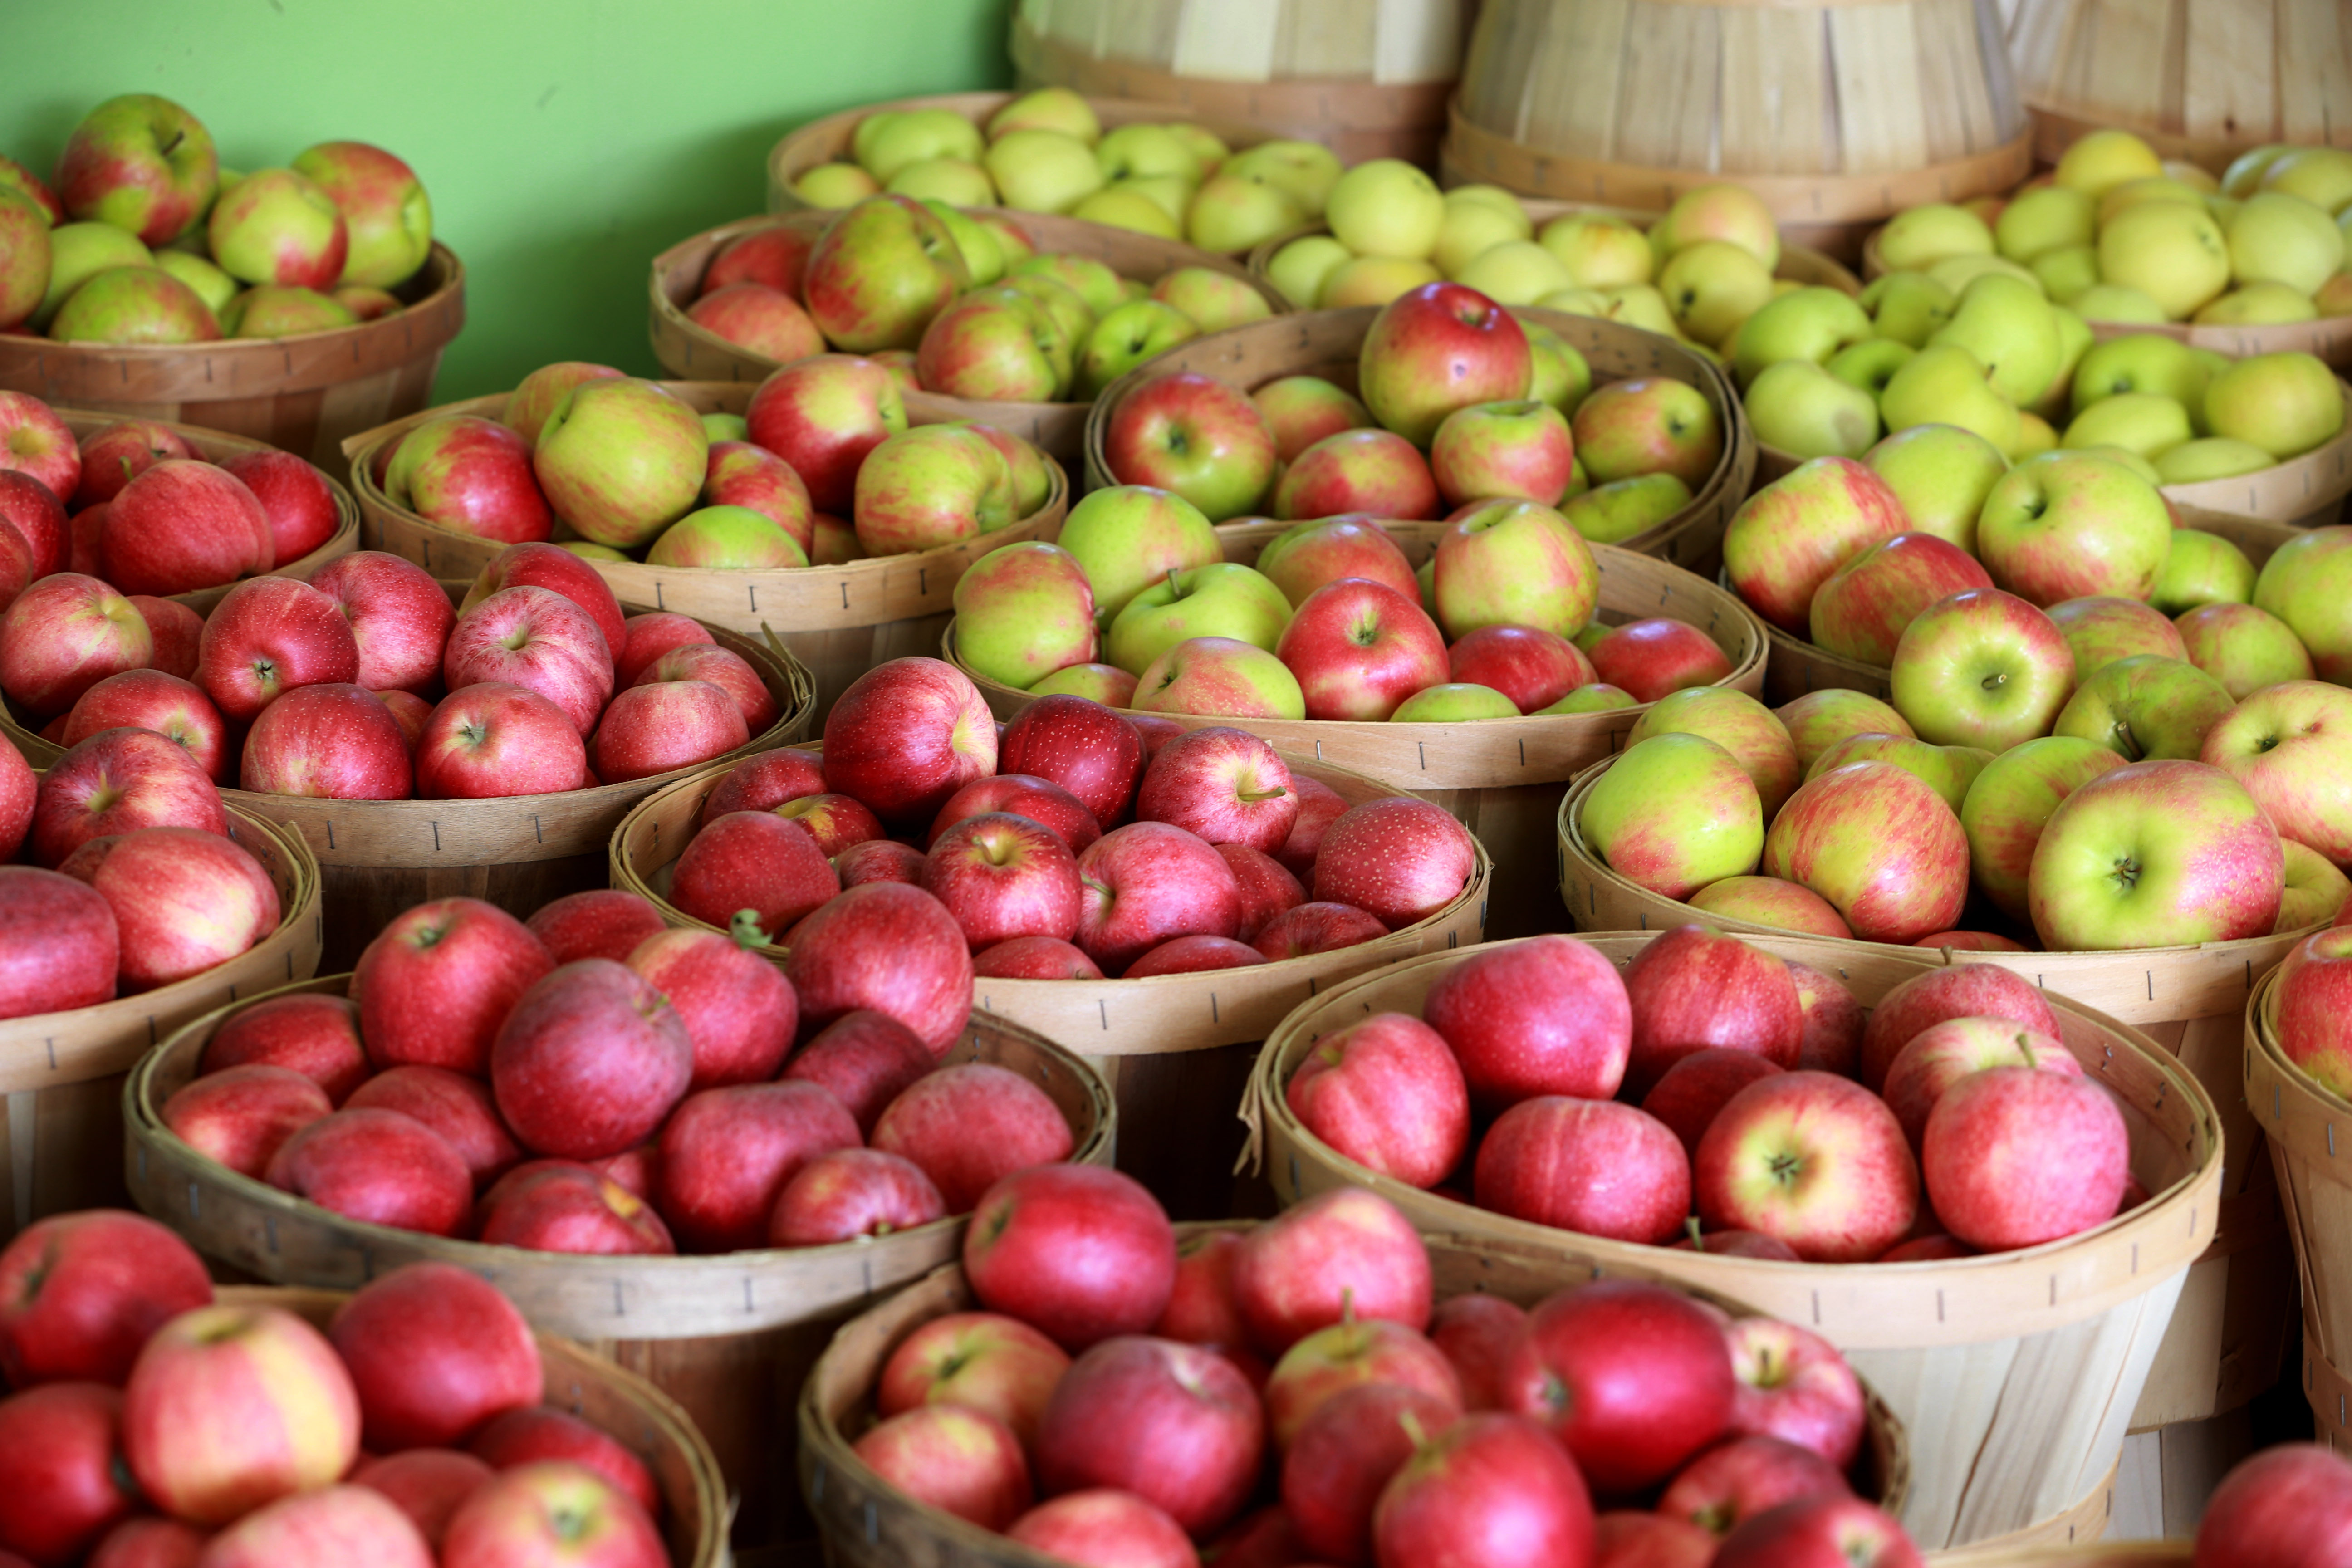 11 reasons why apple picking is the worst fall activity ever invented